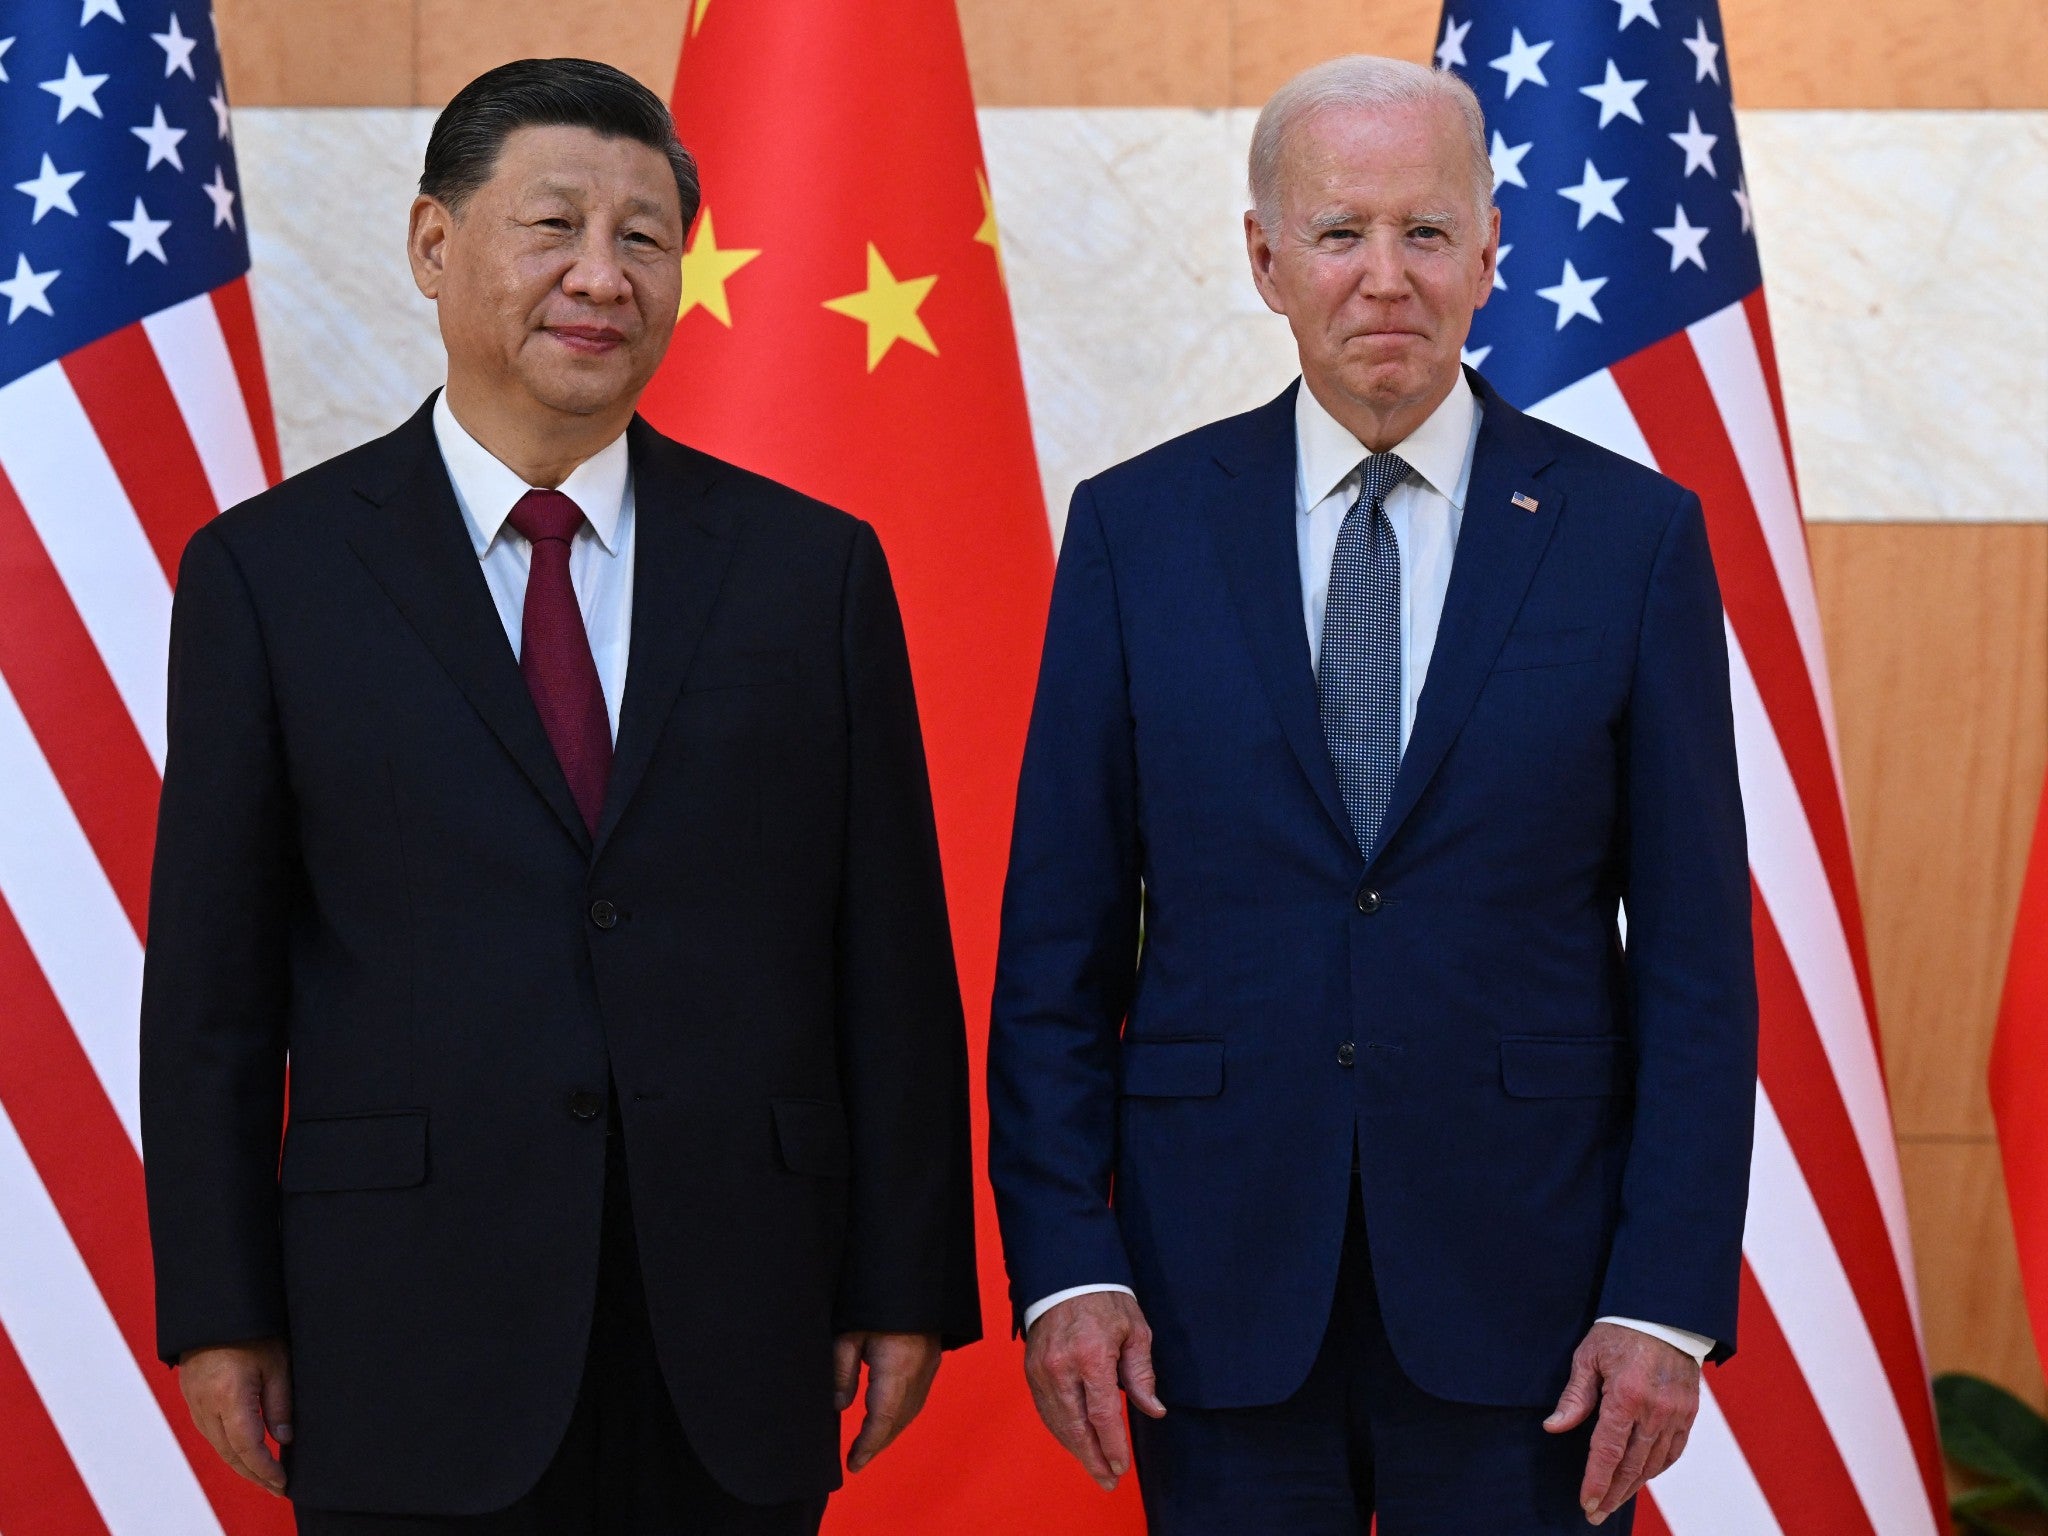 Joe Biden, right, and Xi Jinping met on the sidelines of a G20 summit late last year – but the economic tit-for-tat has continued between the US and China